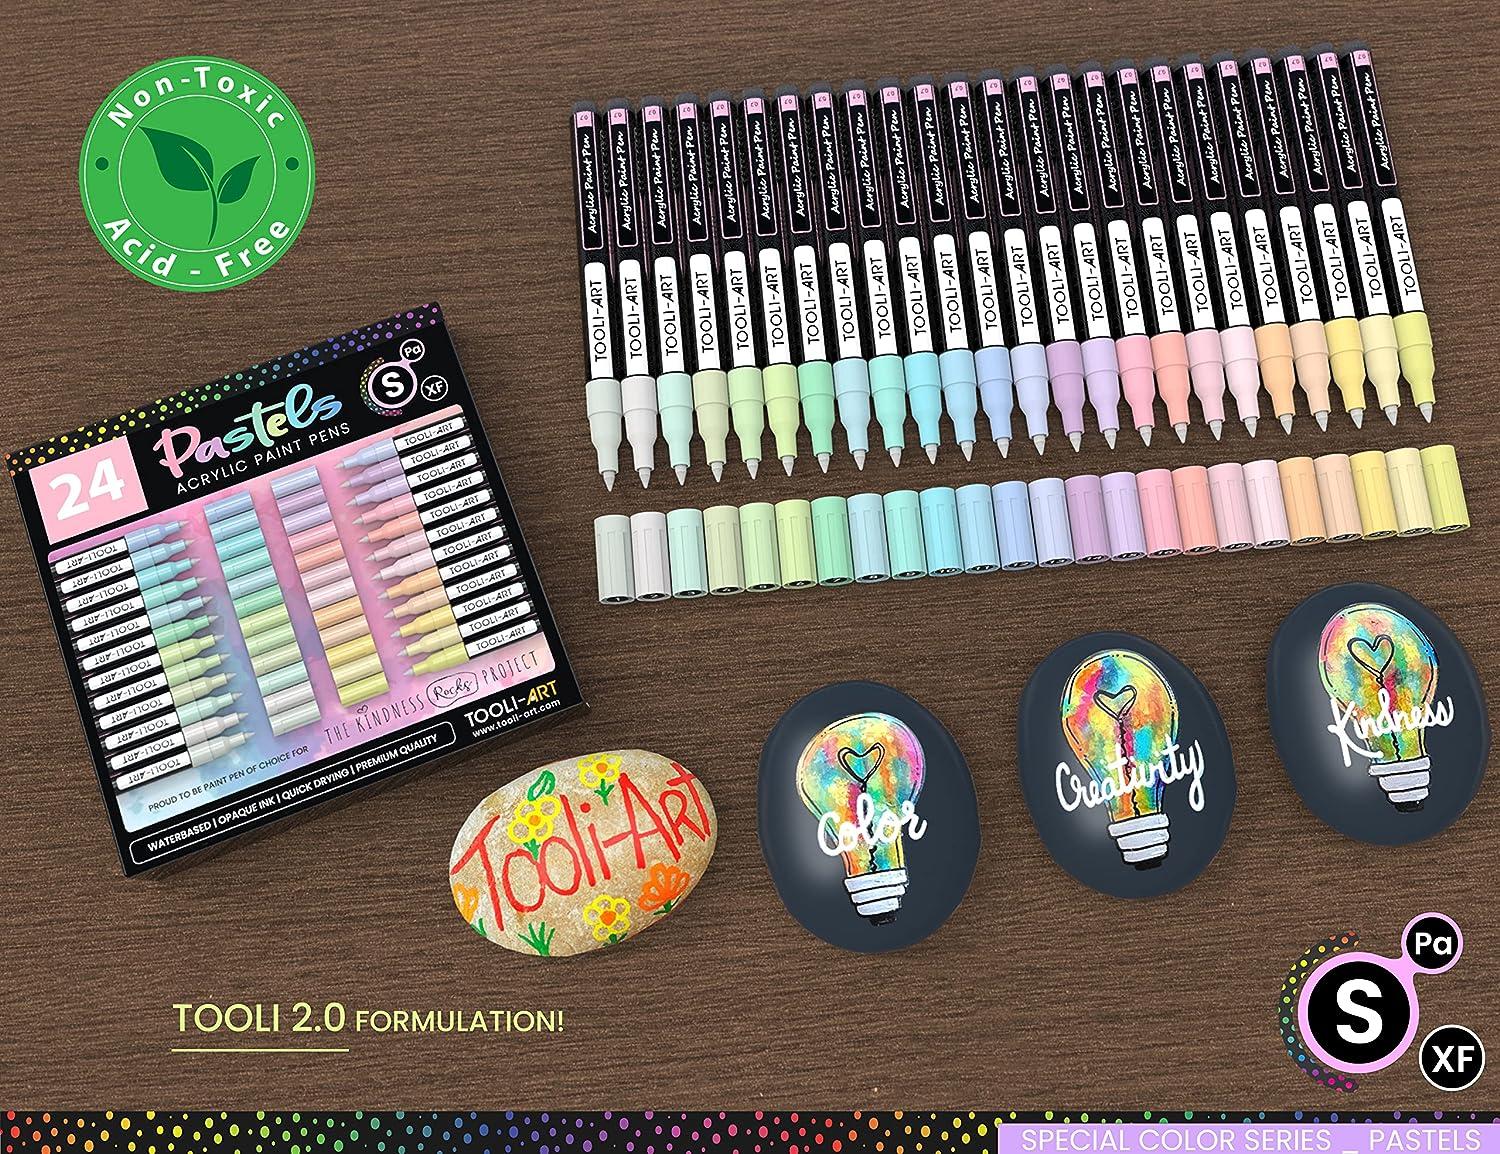 TOOLI-ART Acrylic Paint Markers Paint Pens Special Colors Set For Rock  Painting, Canvas, Fabric, Glass, Mugs, Wood, Ceramics, Plastic,  Multi-Surface. Non Toxic, Water-based (PASTEL M) : Arts, Crafts & Sewing, Tooli  Art